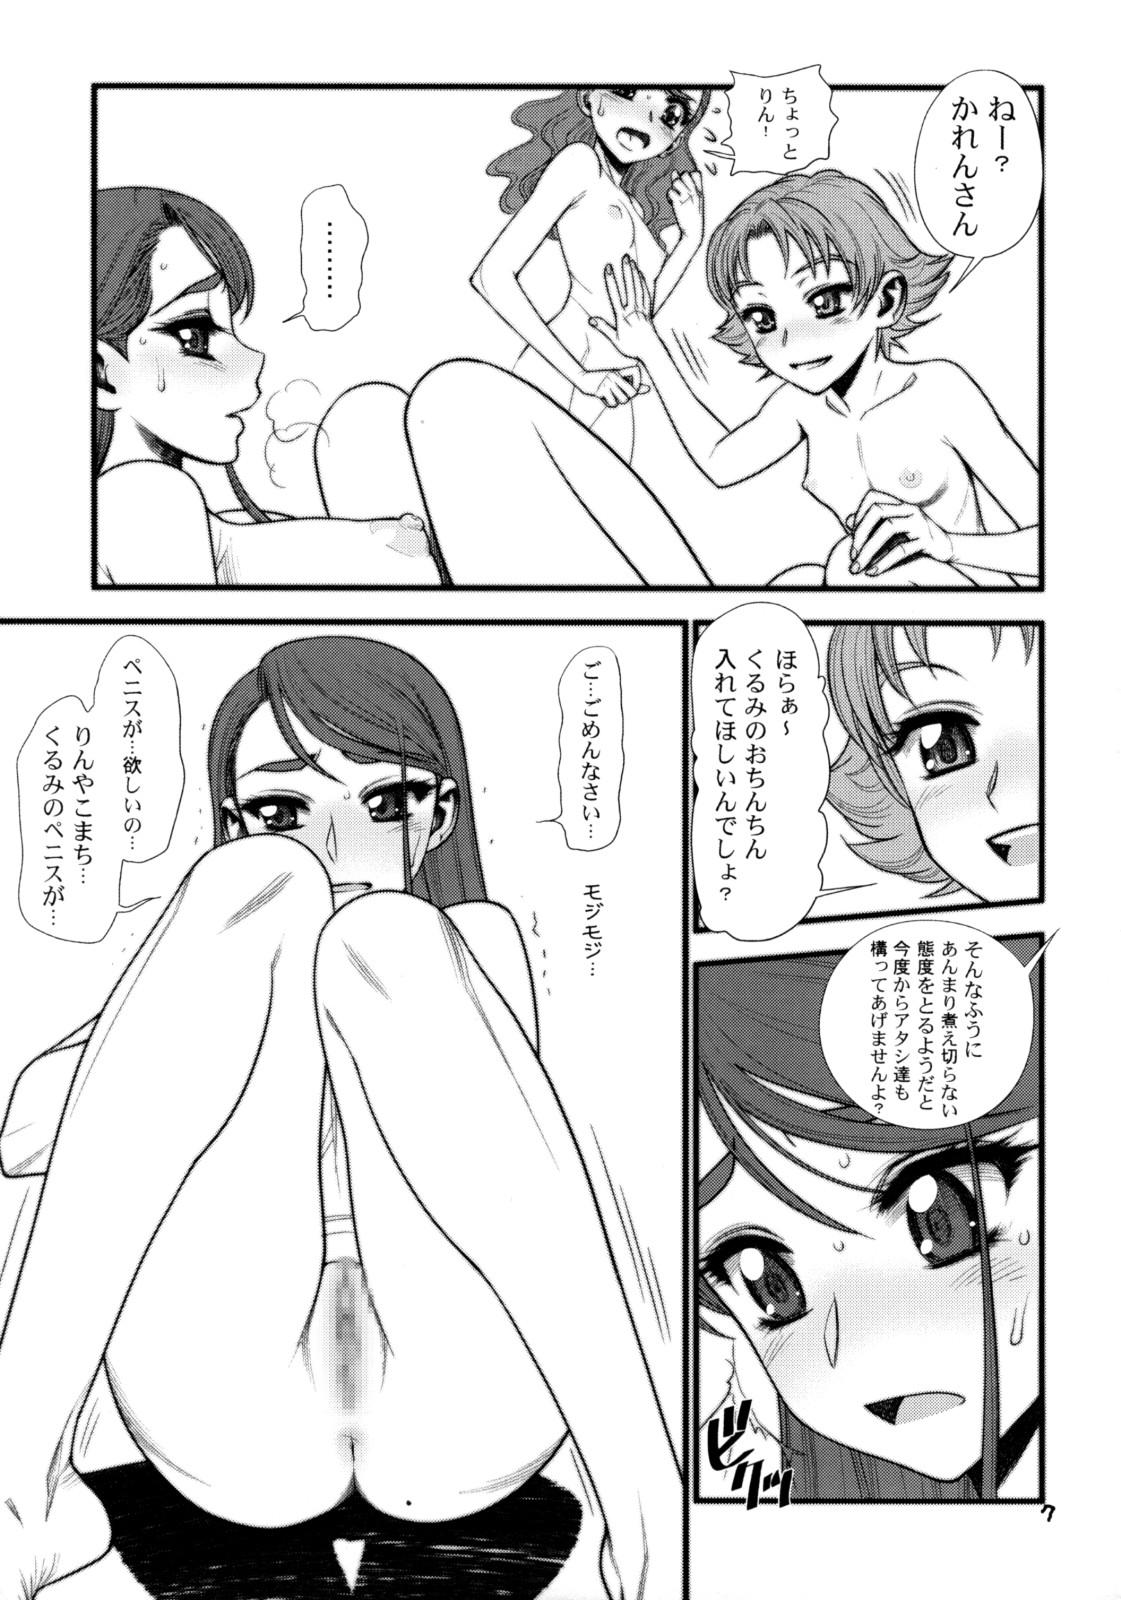 Hot Milf Glass no Karen - Yes precure 5 Mouth - Page 6